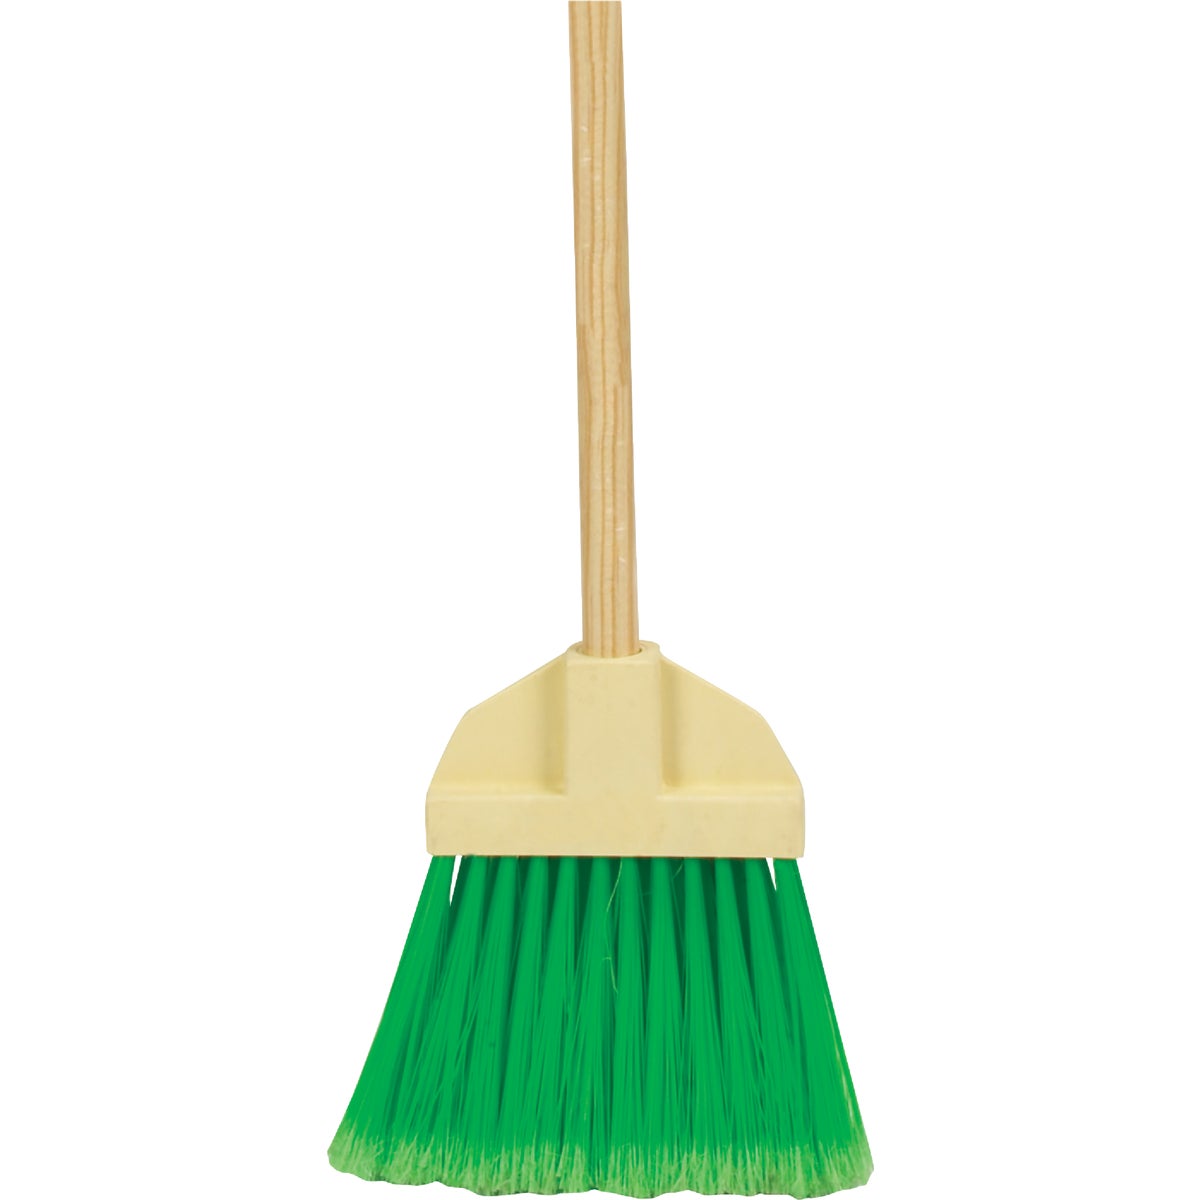 Item 611056, Soft, lightweight lobby broom is filled with rugged, flagged plastic 